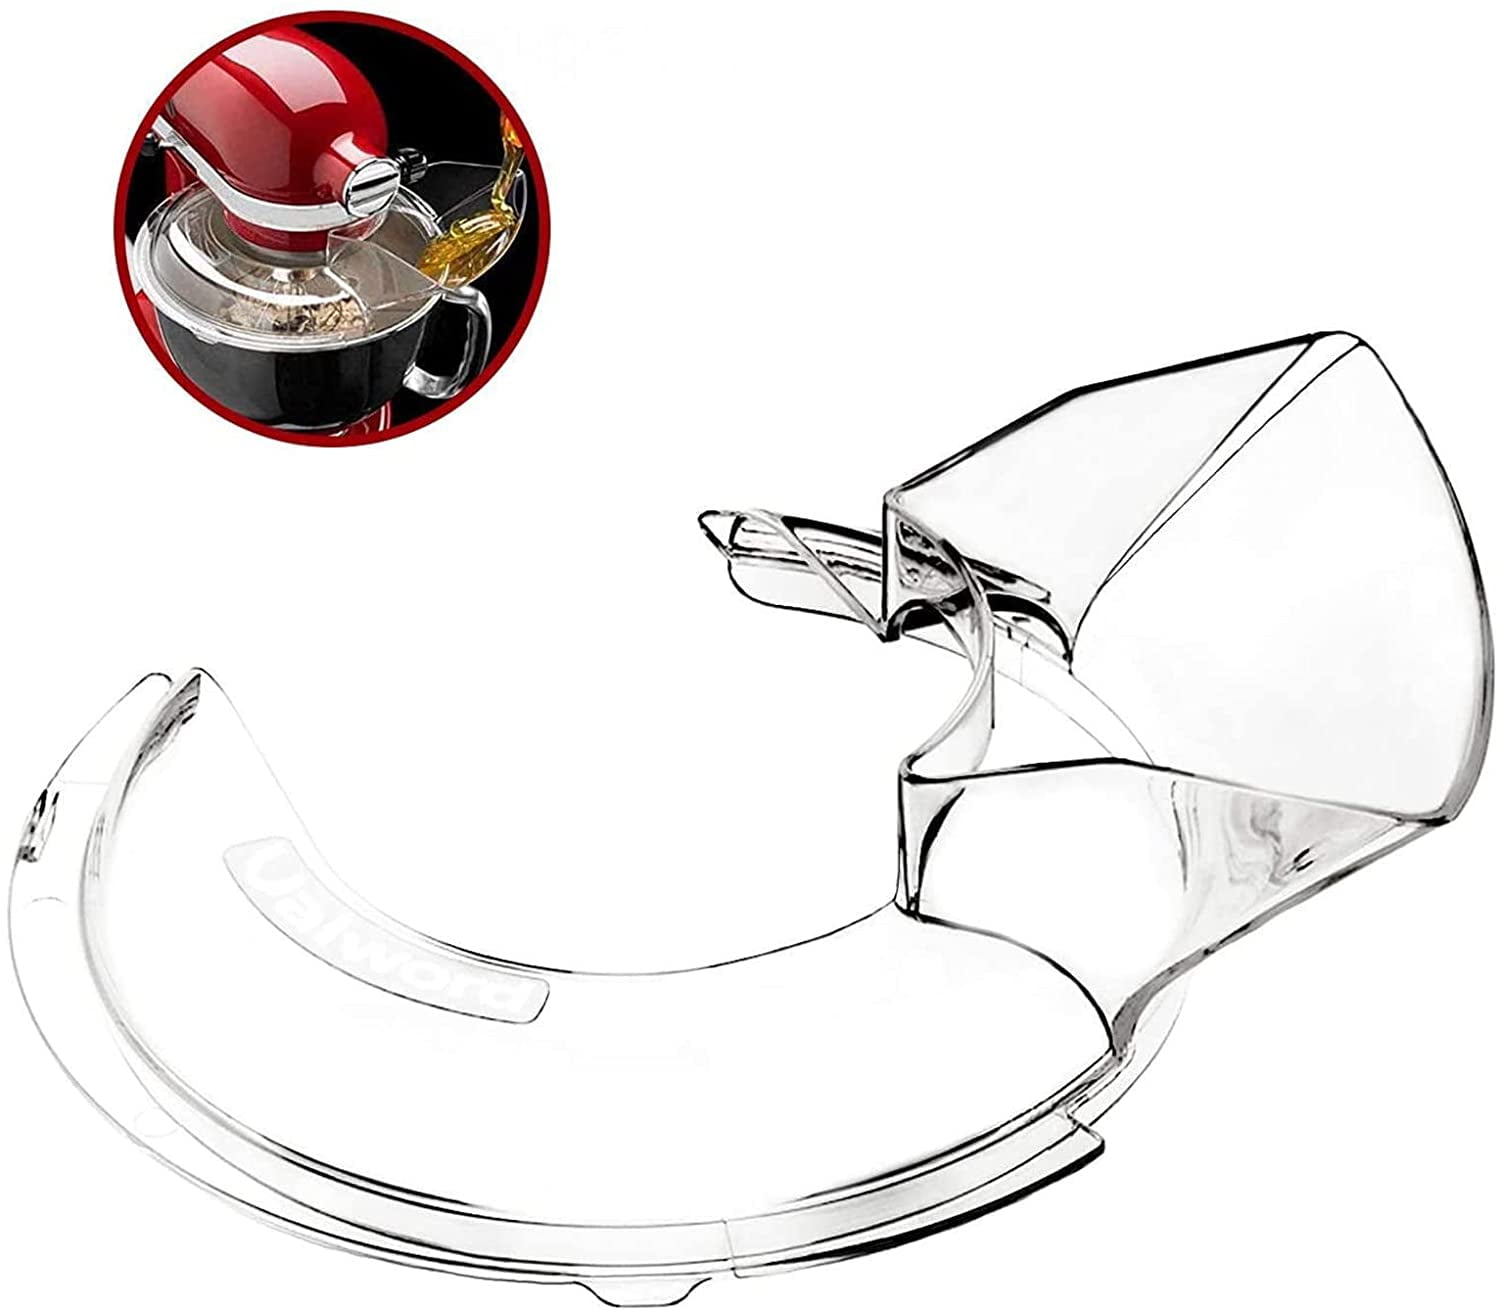 Pouring Shield for KitchenAid 4.5 and 5 Quart Tilt-Head Stand Mixers  Stainless Steel Bowls ONLY, Secure Fit Splatter Guard, and Flex Edge Beater  for